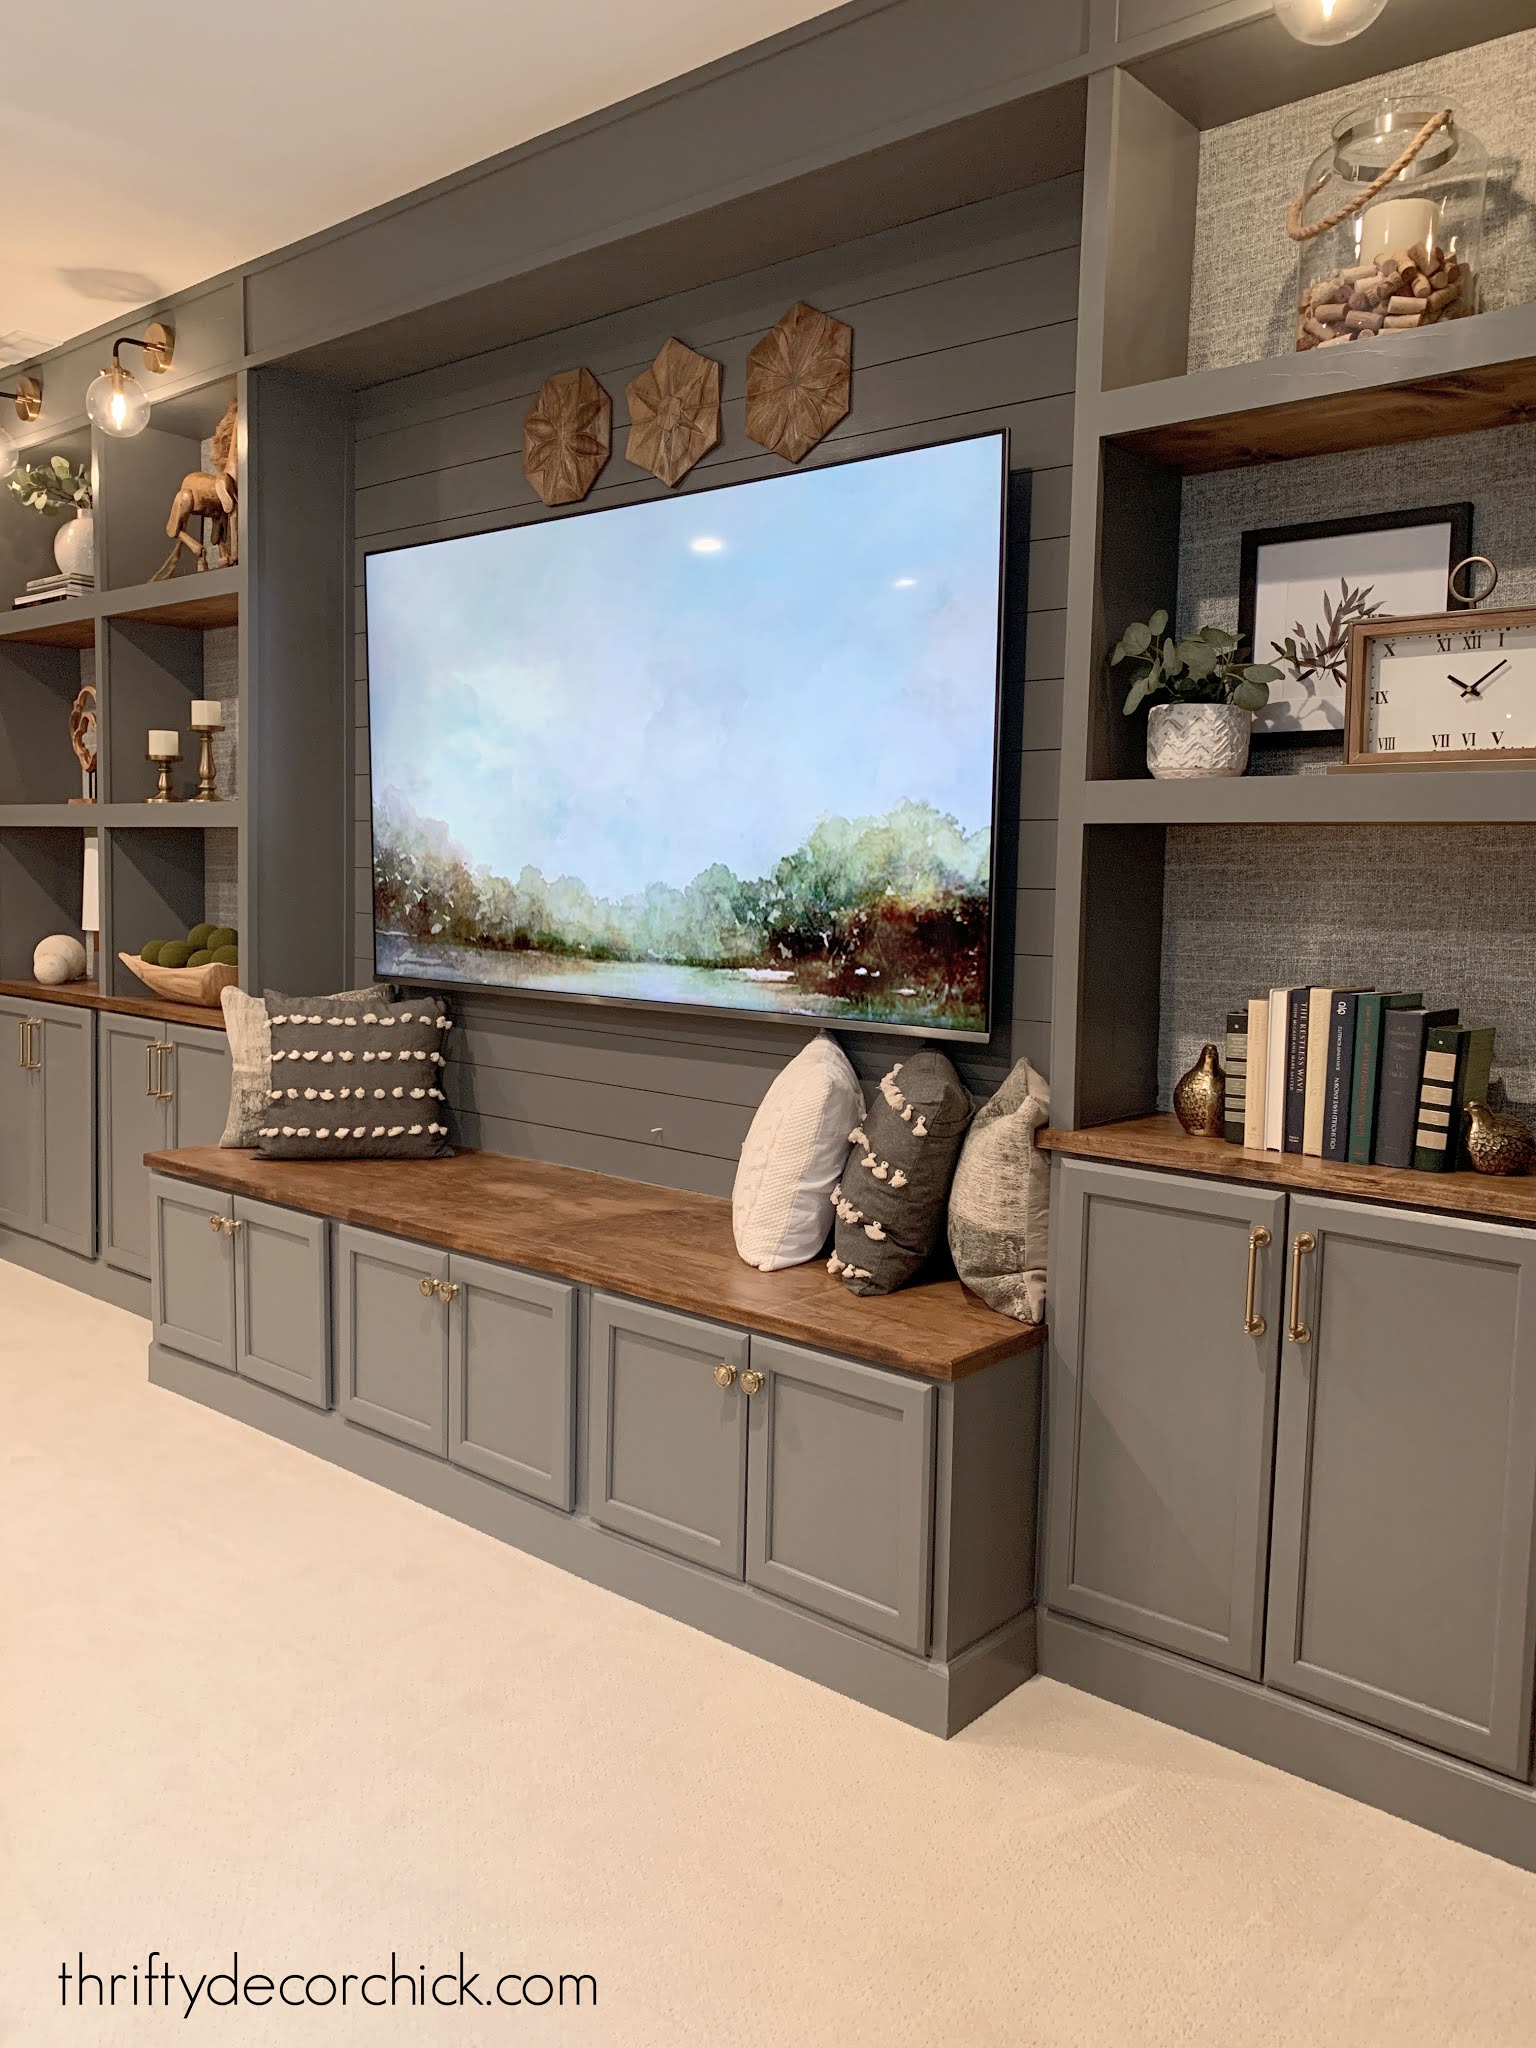 Get the Most Out of Your Space with Wall Storage Cabinets